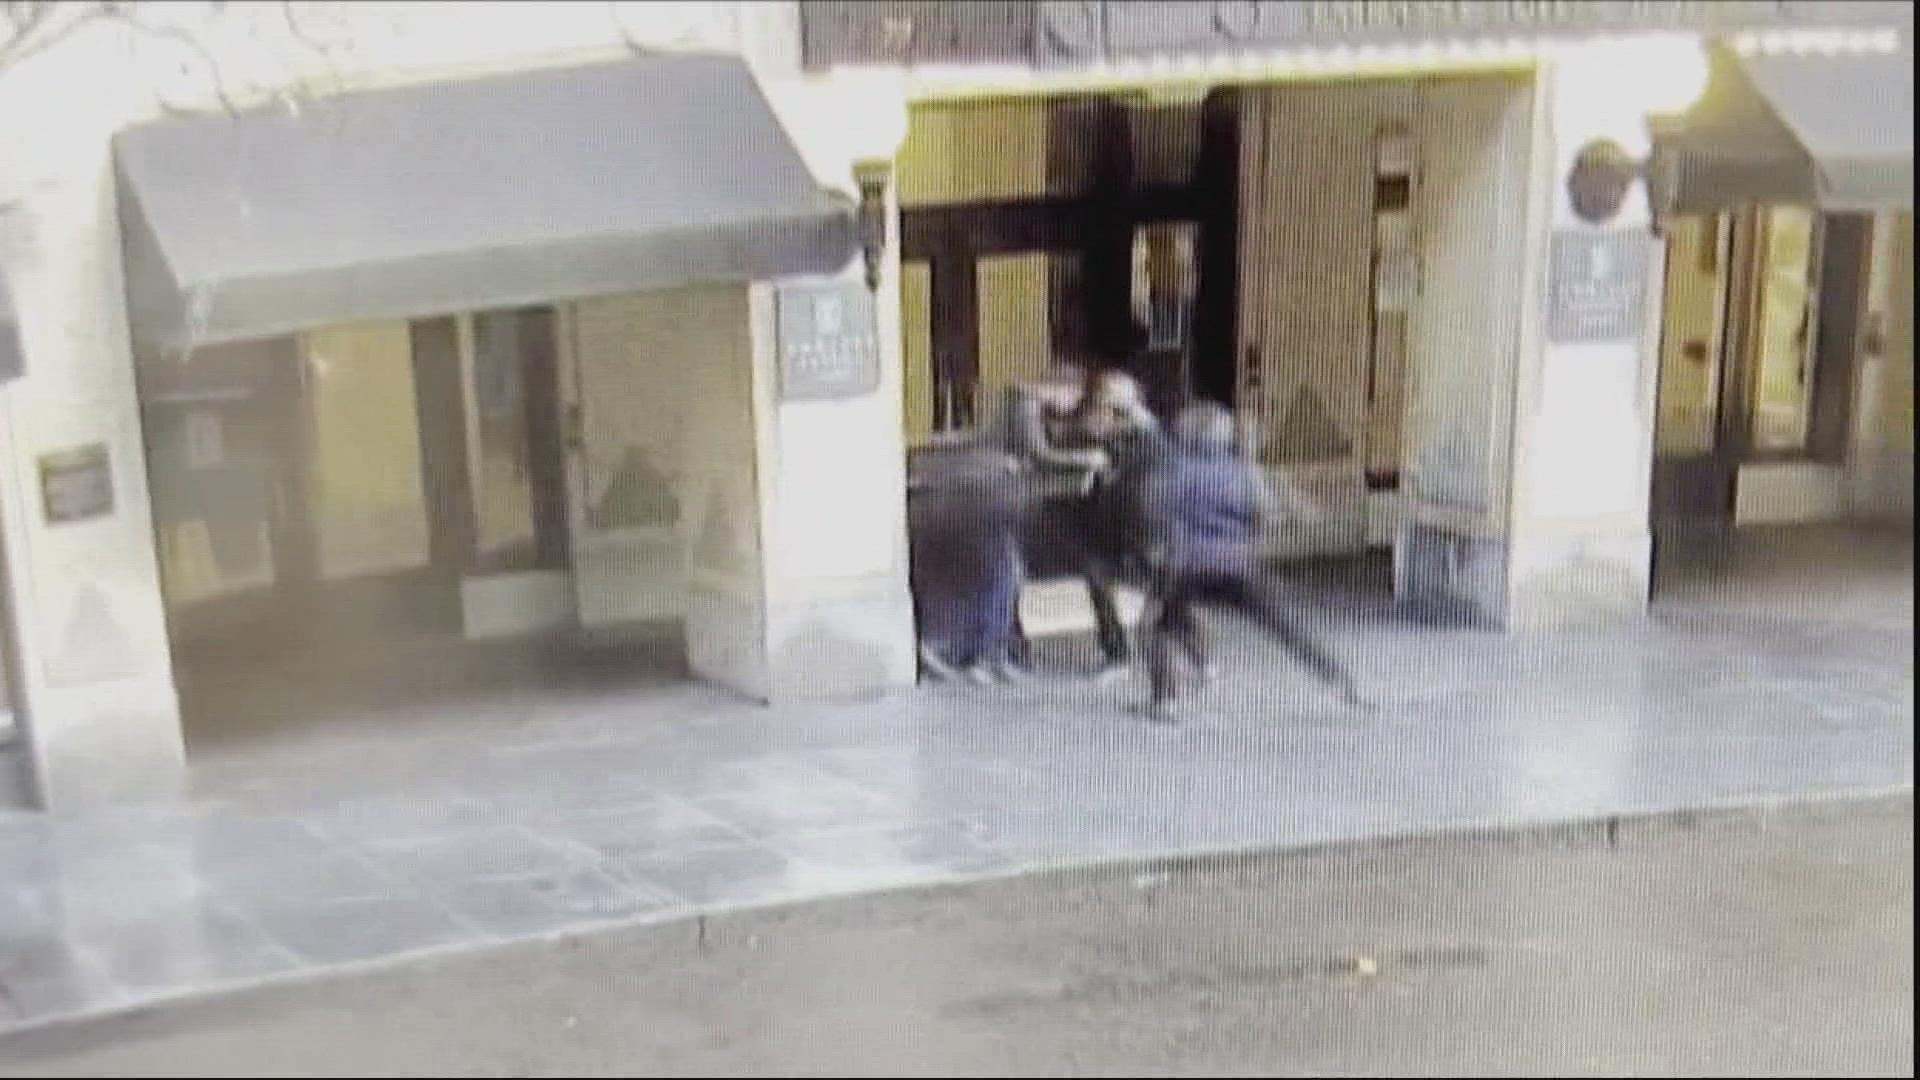 An unknown assailant injured two men in a seemingly random attack outside a Portland hotel in January. Security footage captured the unprovoked assault.